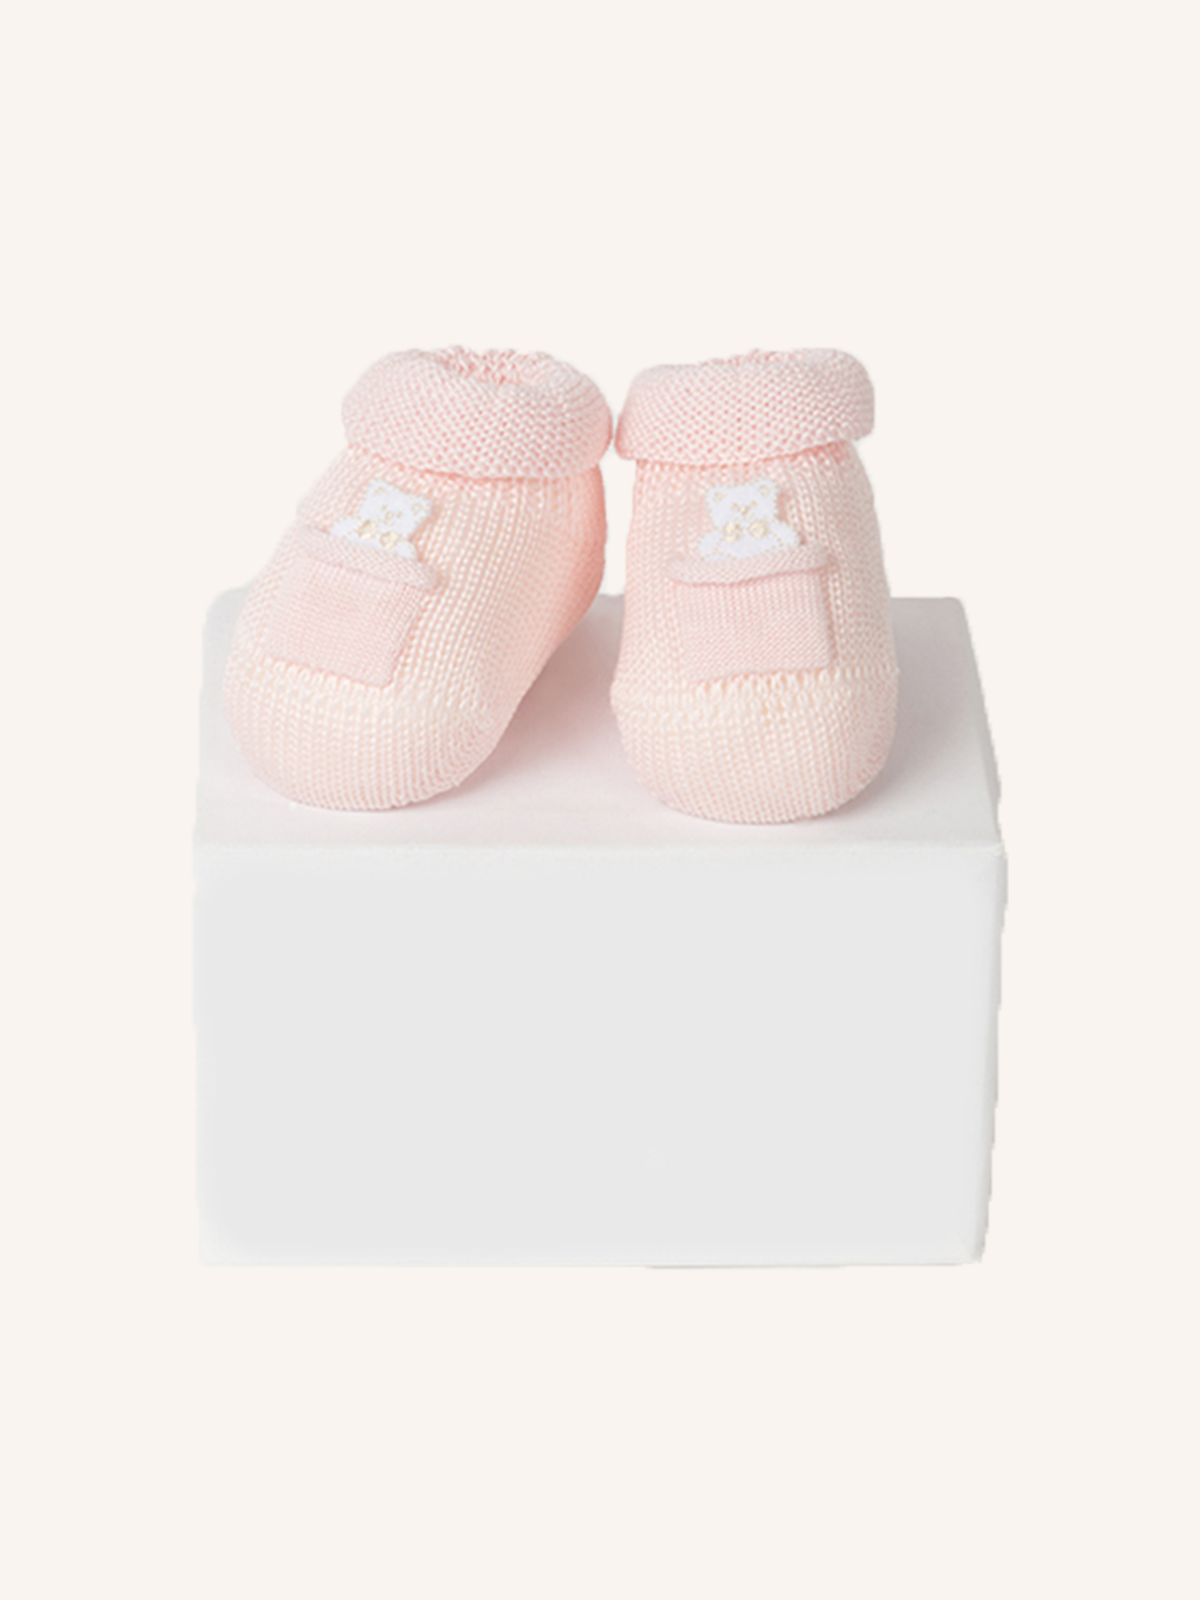 Slipper in Cotton with Pocket and Teddy Bear for Newborn | Solid Color | Pack of 1 Pair | 41621